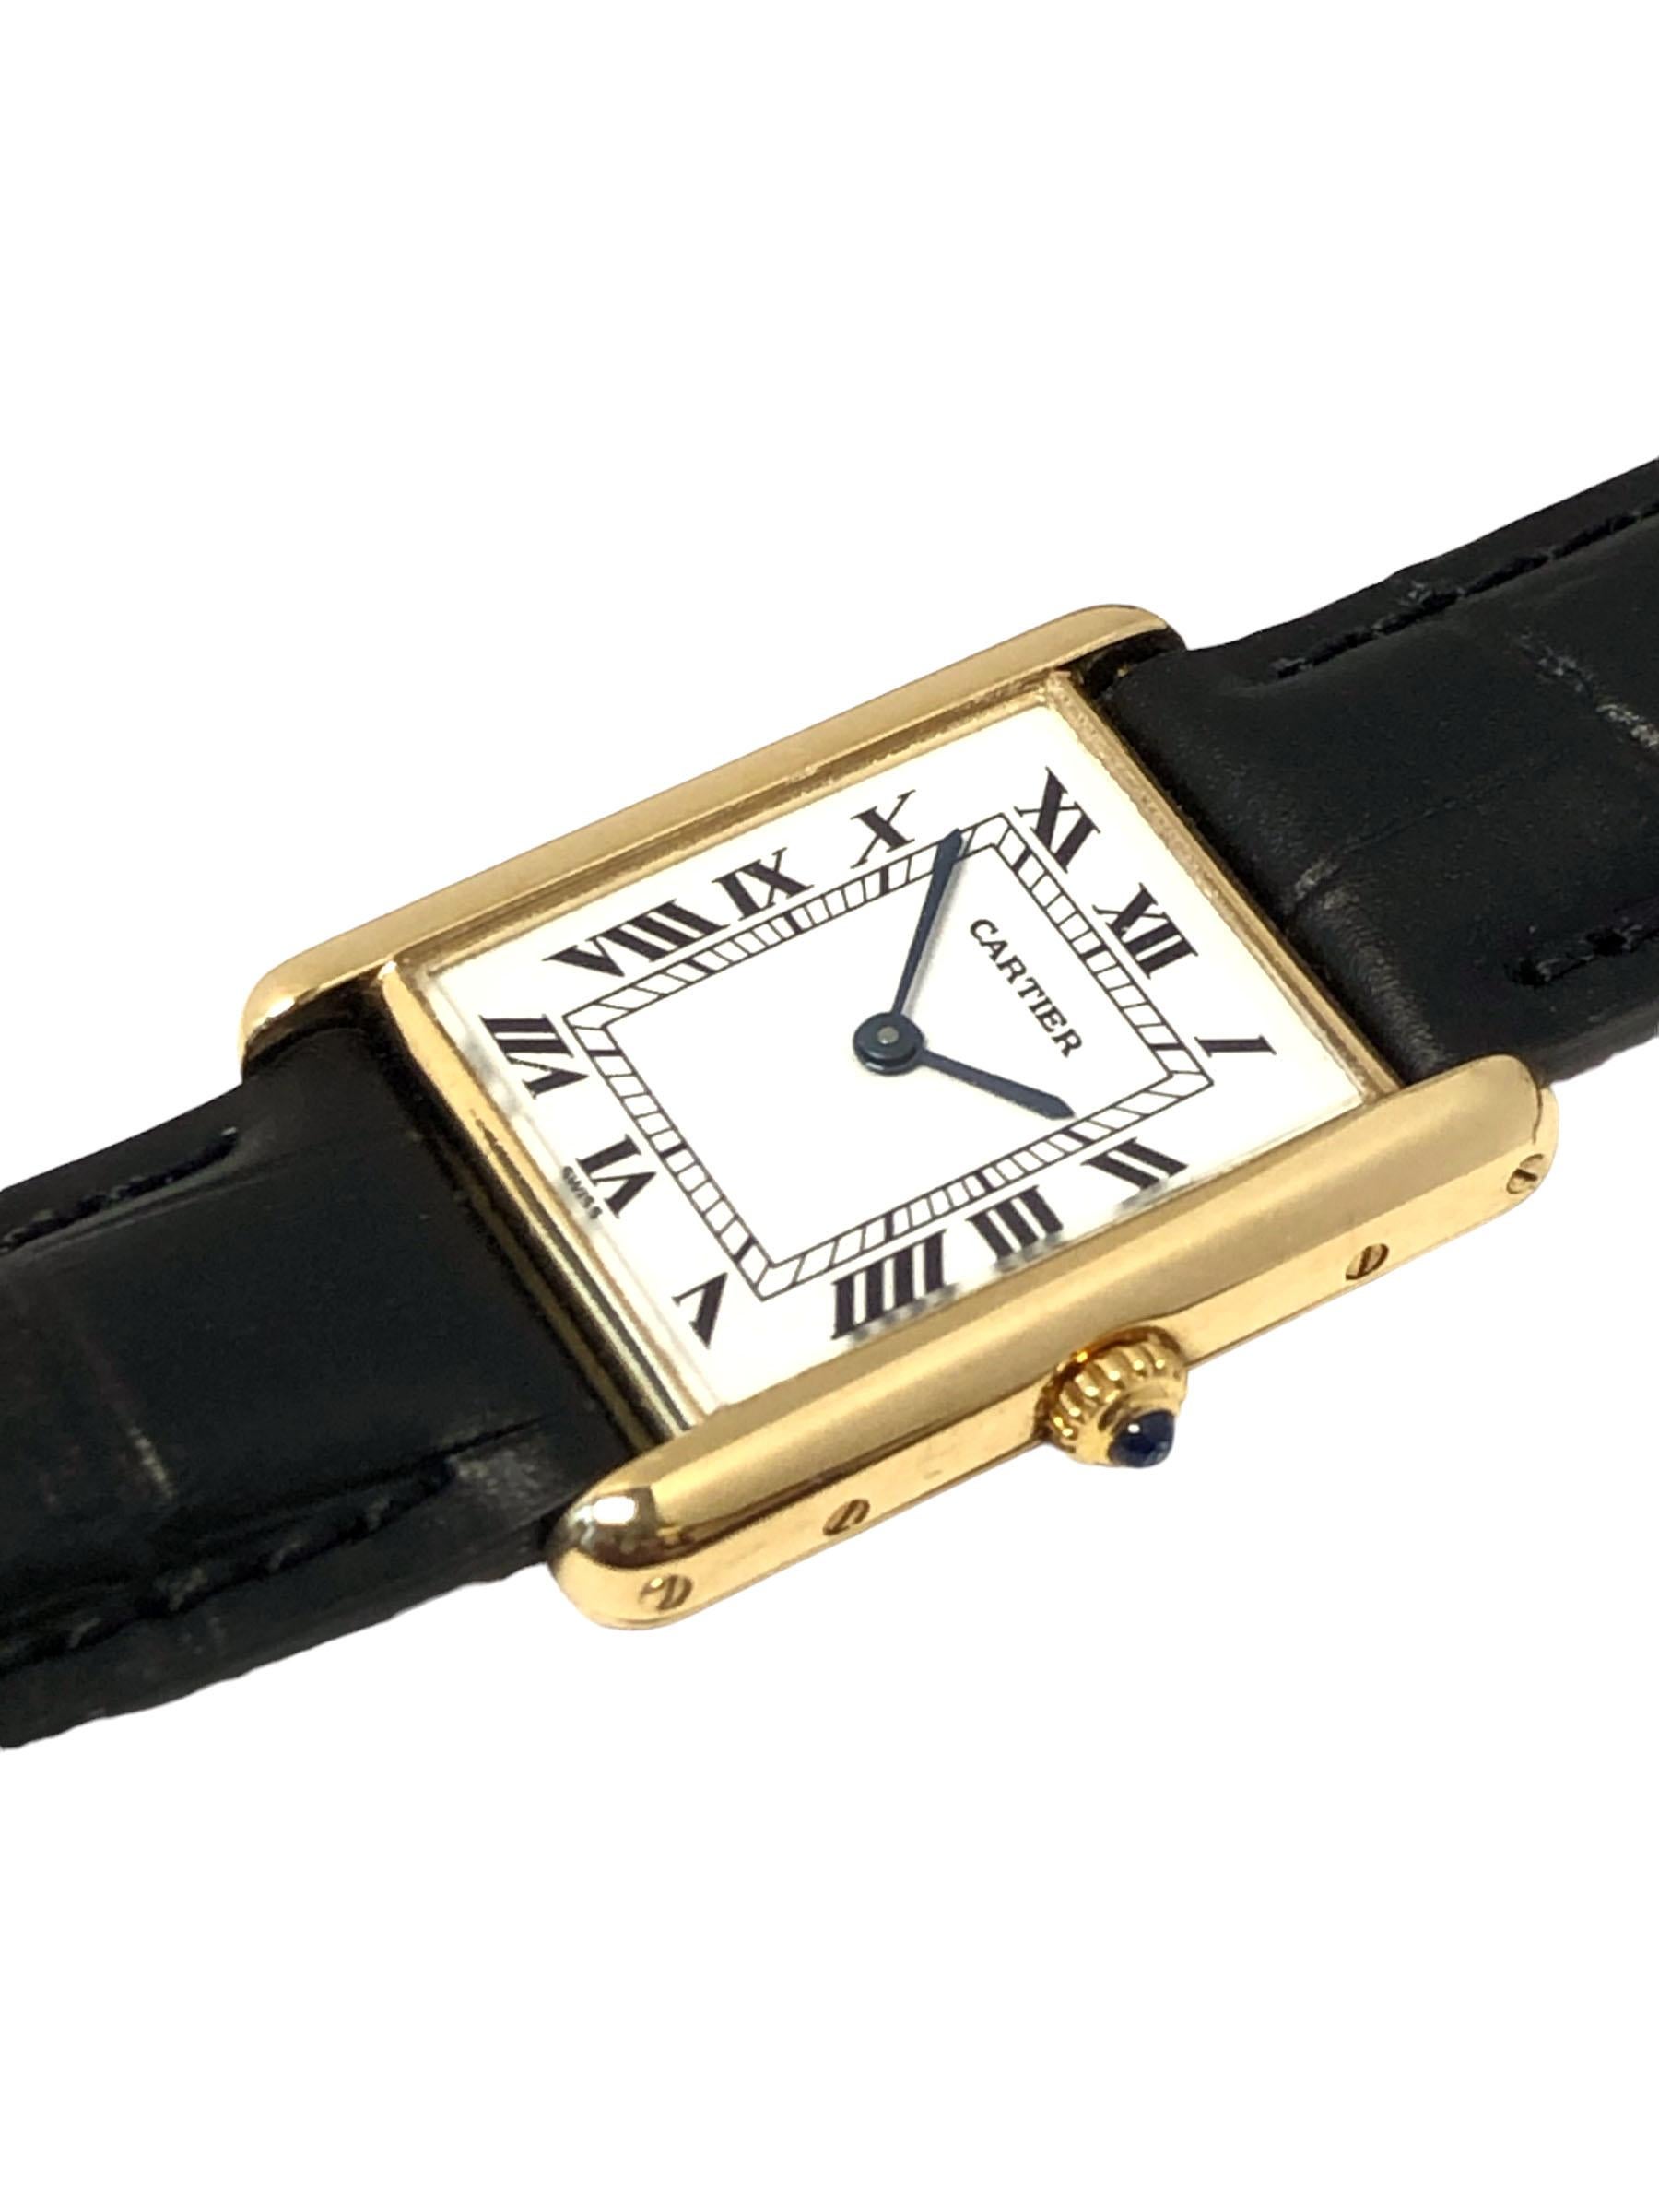 Cartier Classic Louis Cartier Yellow Gold Tank Wrist Watch In Excellent Condition For Sale In Chicago, IL